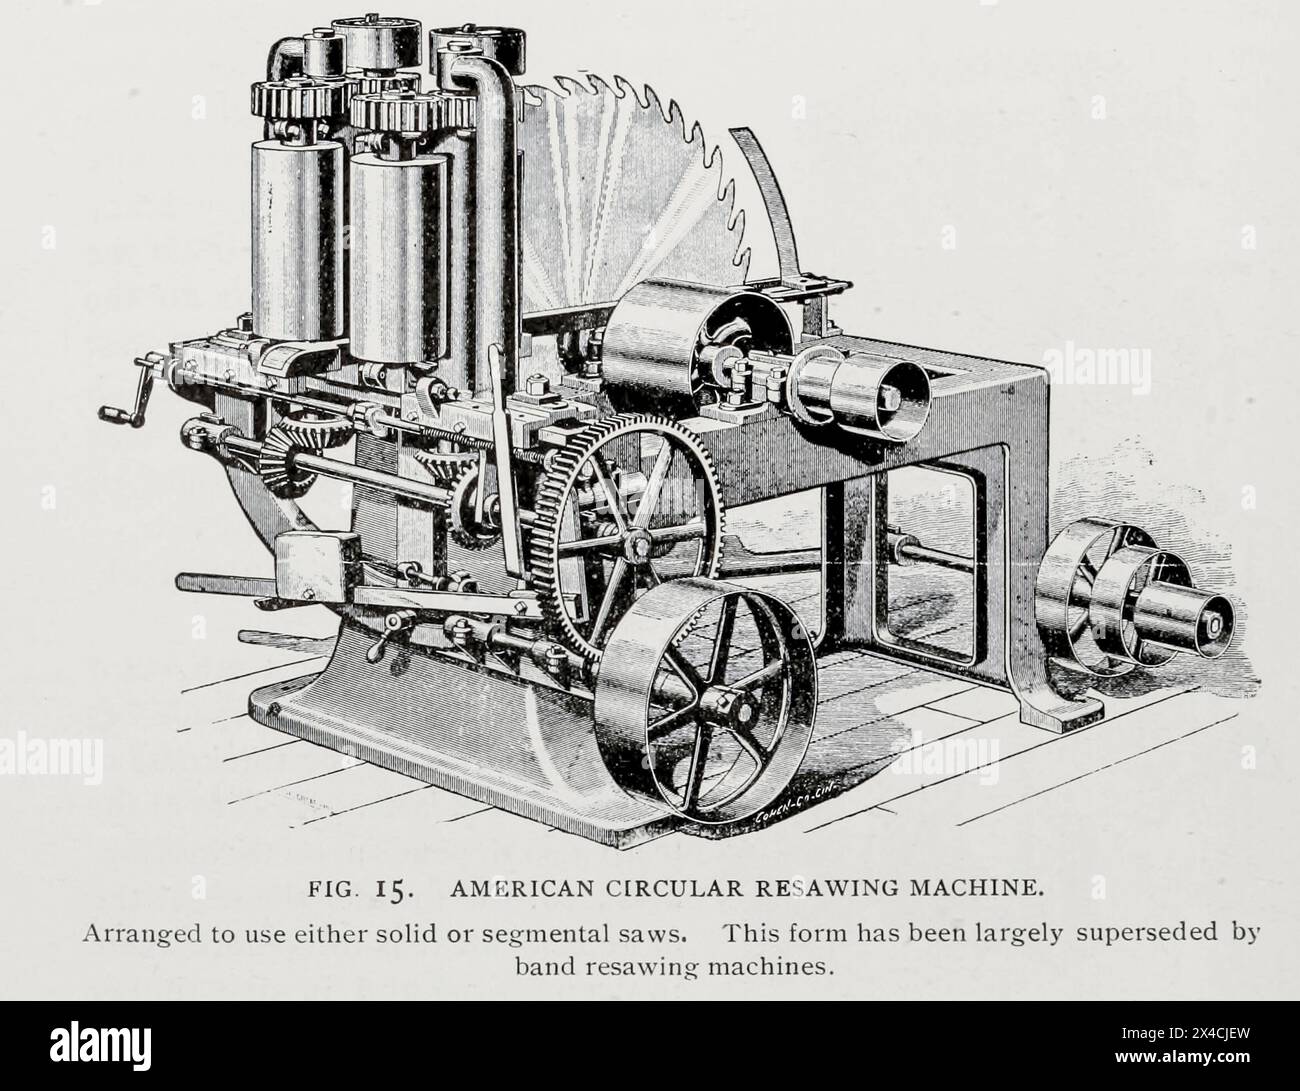 AMERICAN CIRCULAR RESAWING MACHINE. Arranged to use either solid or segmental saws. This form has been largely superseded by band resawing machines. from the Article THE DEVELOPMENT OF WOOD-WORKING MACHINERY. By John Richards. from The Engineering Magazine Devoted to Industrial Progress Volume XVI October 1898 - March 1899 The Engineering Magazine Co Stock Photo